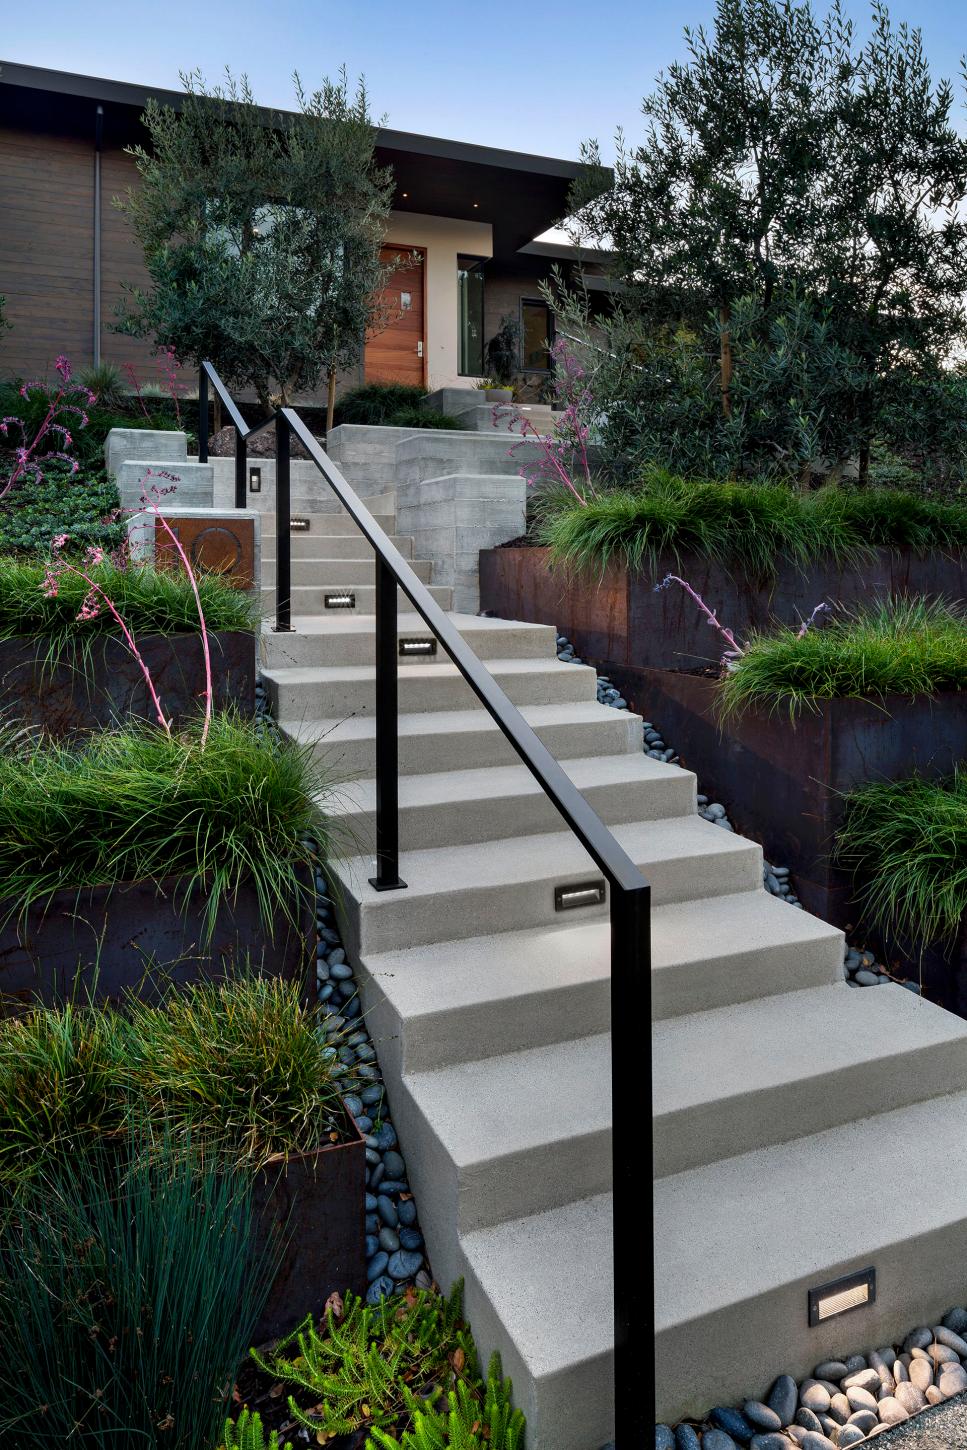 Polished Concrete Steps Lined With Plants | HGTV